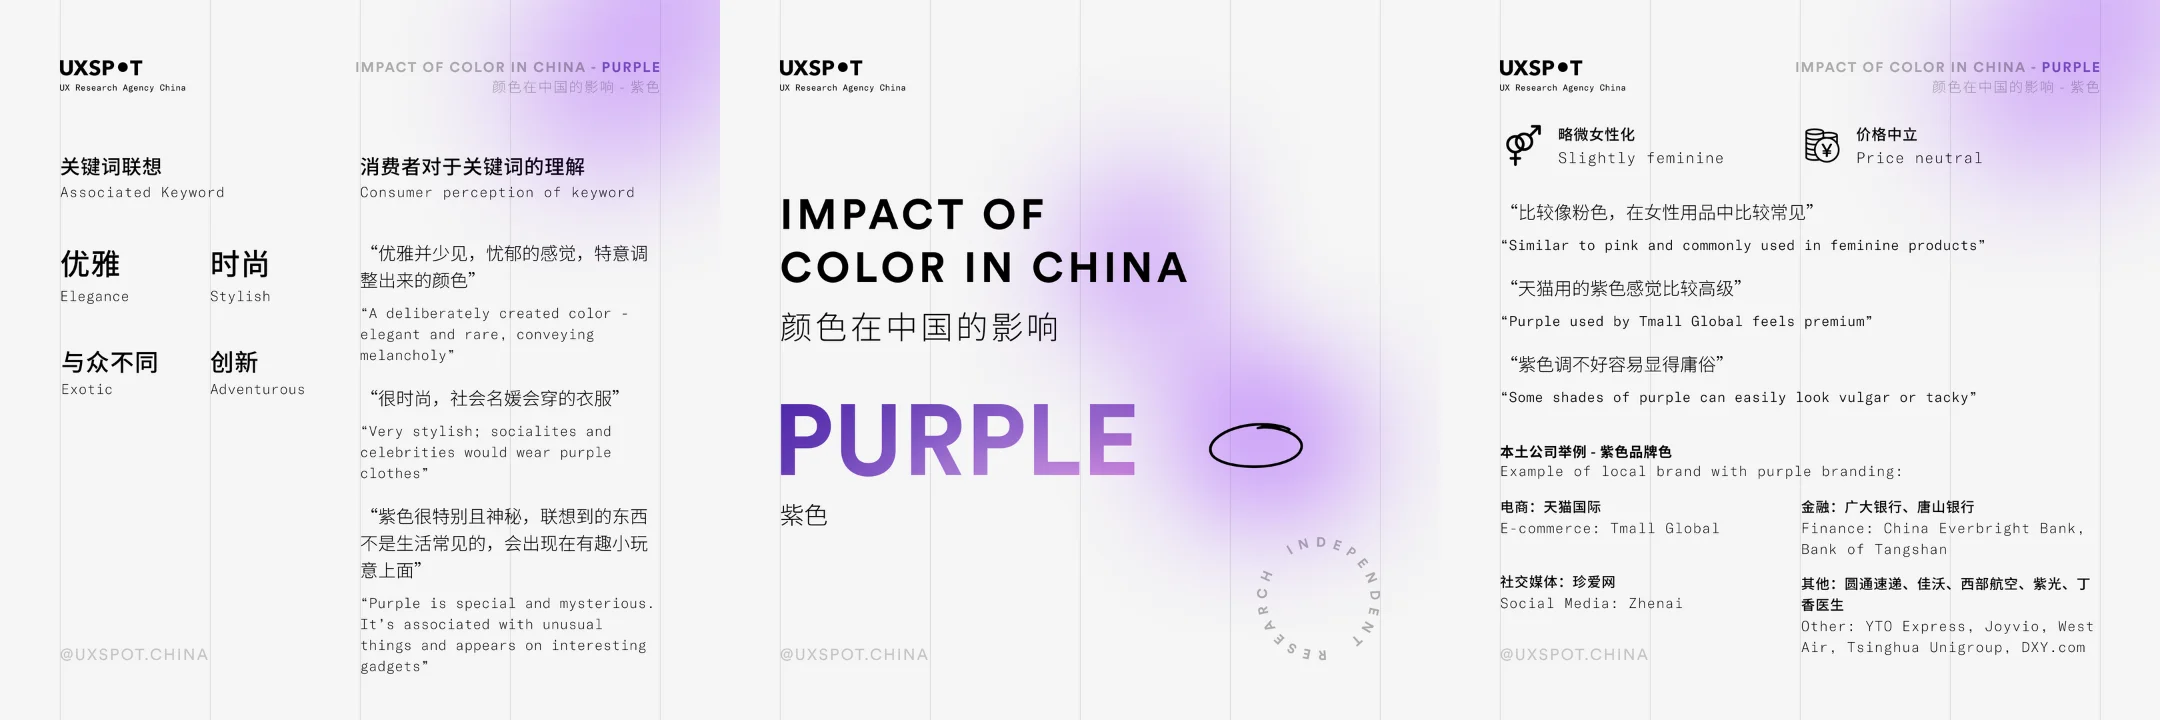 color psychology China color purple data summary